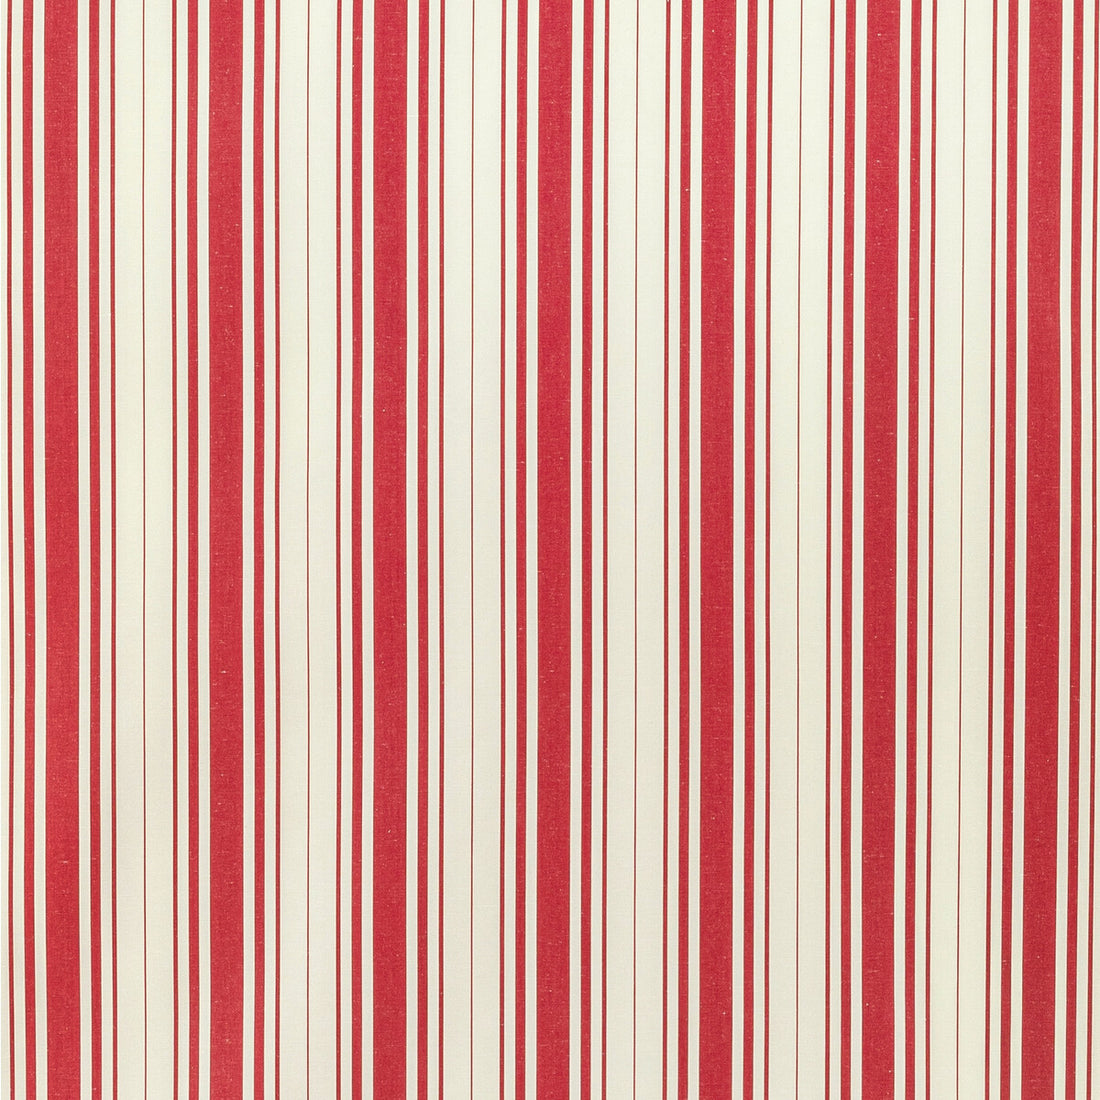 Baldwin Stripe fabric in poppy color - pattern 2022100.19.0 - by Lee Jofa in the Sarah Bartholomew collection